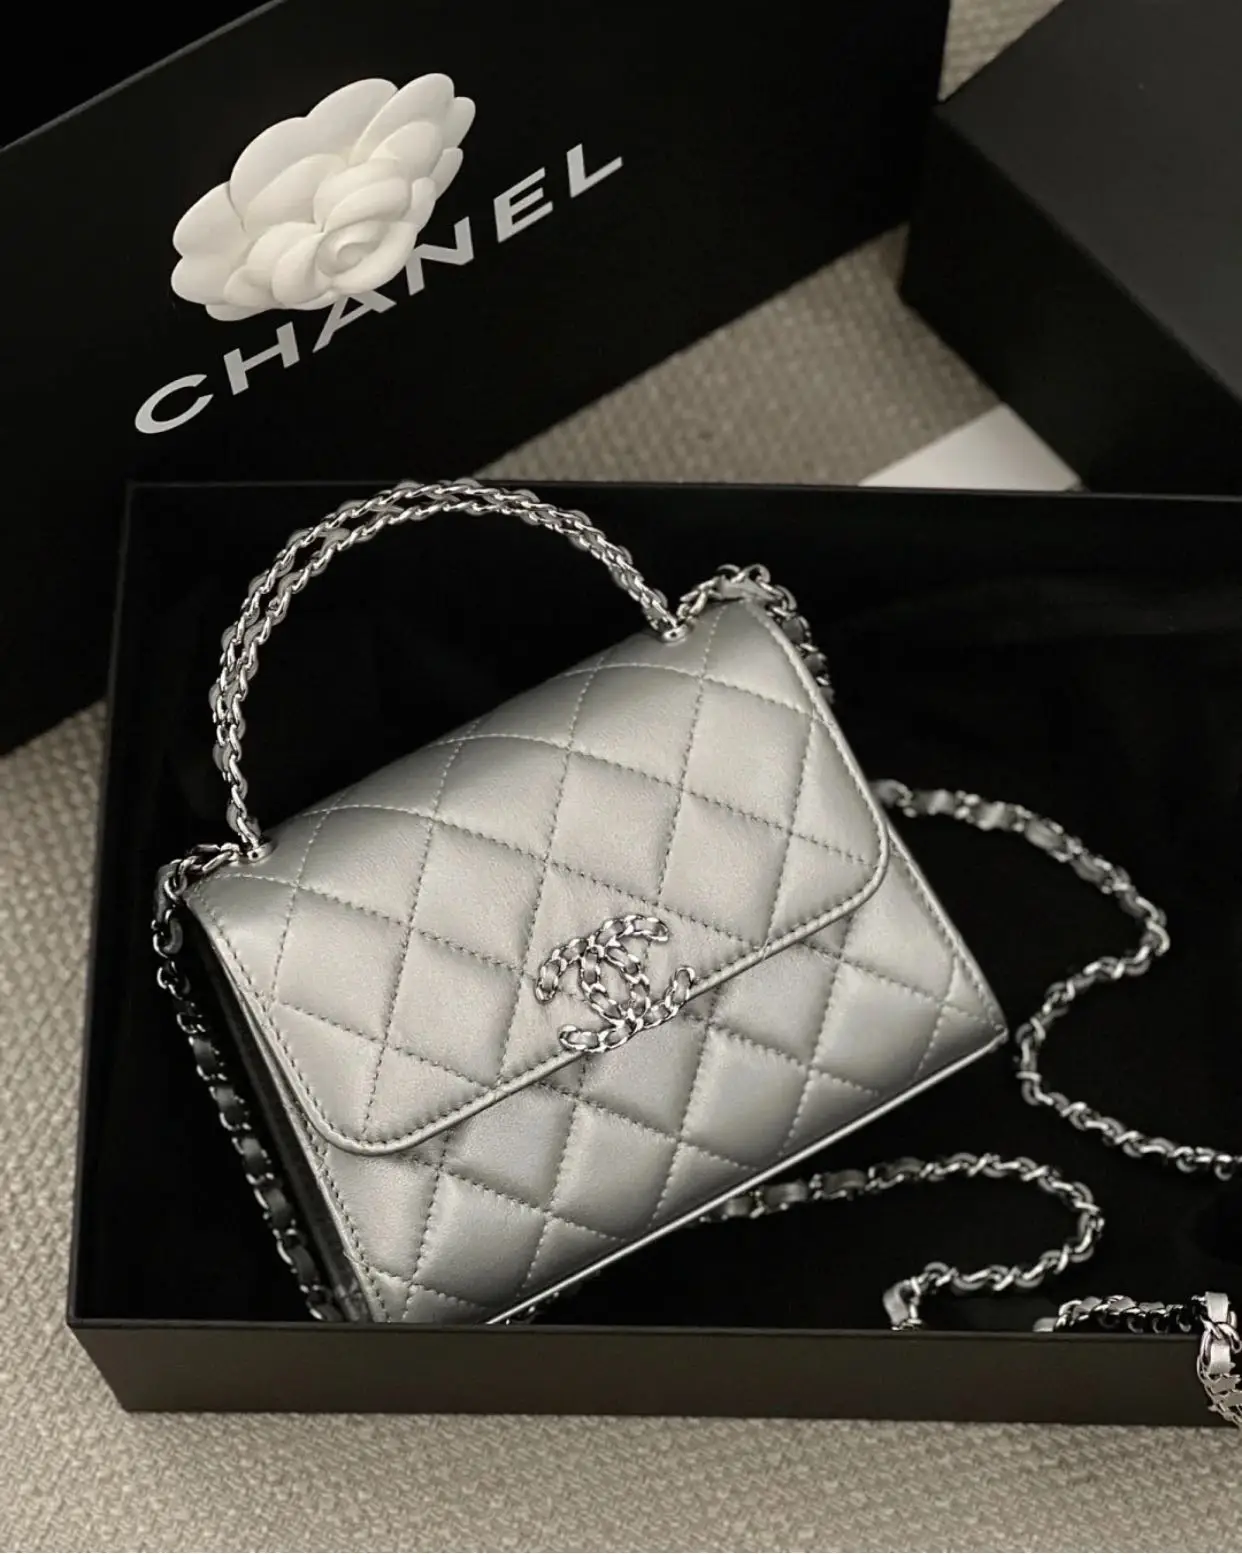 The Best Affordable Chanel Bags for Every Budget